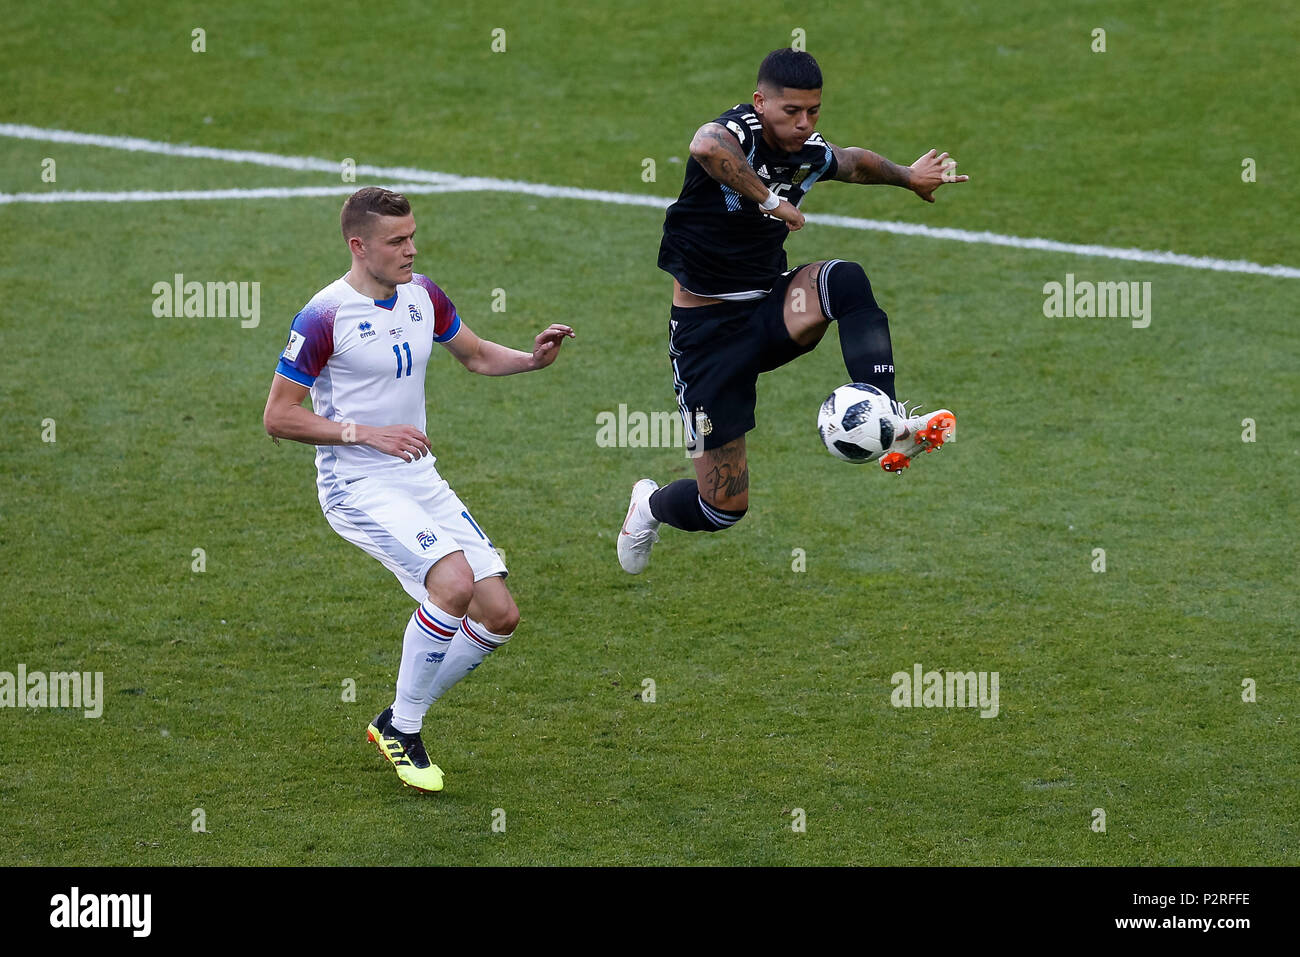 Moscow, Russia. 16th Jun, 2018. Alfred Finnbogason of Iceland and Marcos Rojo of Argentina during the 2018 FIFA World Cup Group D match between Argentina and Iceland at Spartak Stadium on June 16th 2018 in Moscow, Russia. (Photo by Daniel Chesterton/phcimages.com) Credit: PHC Images/Alamy Live News Stock Photo